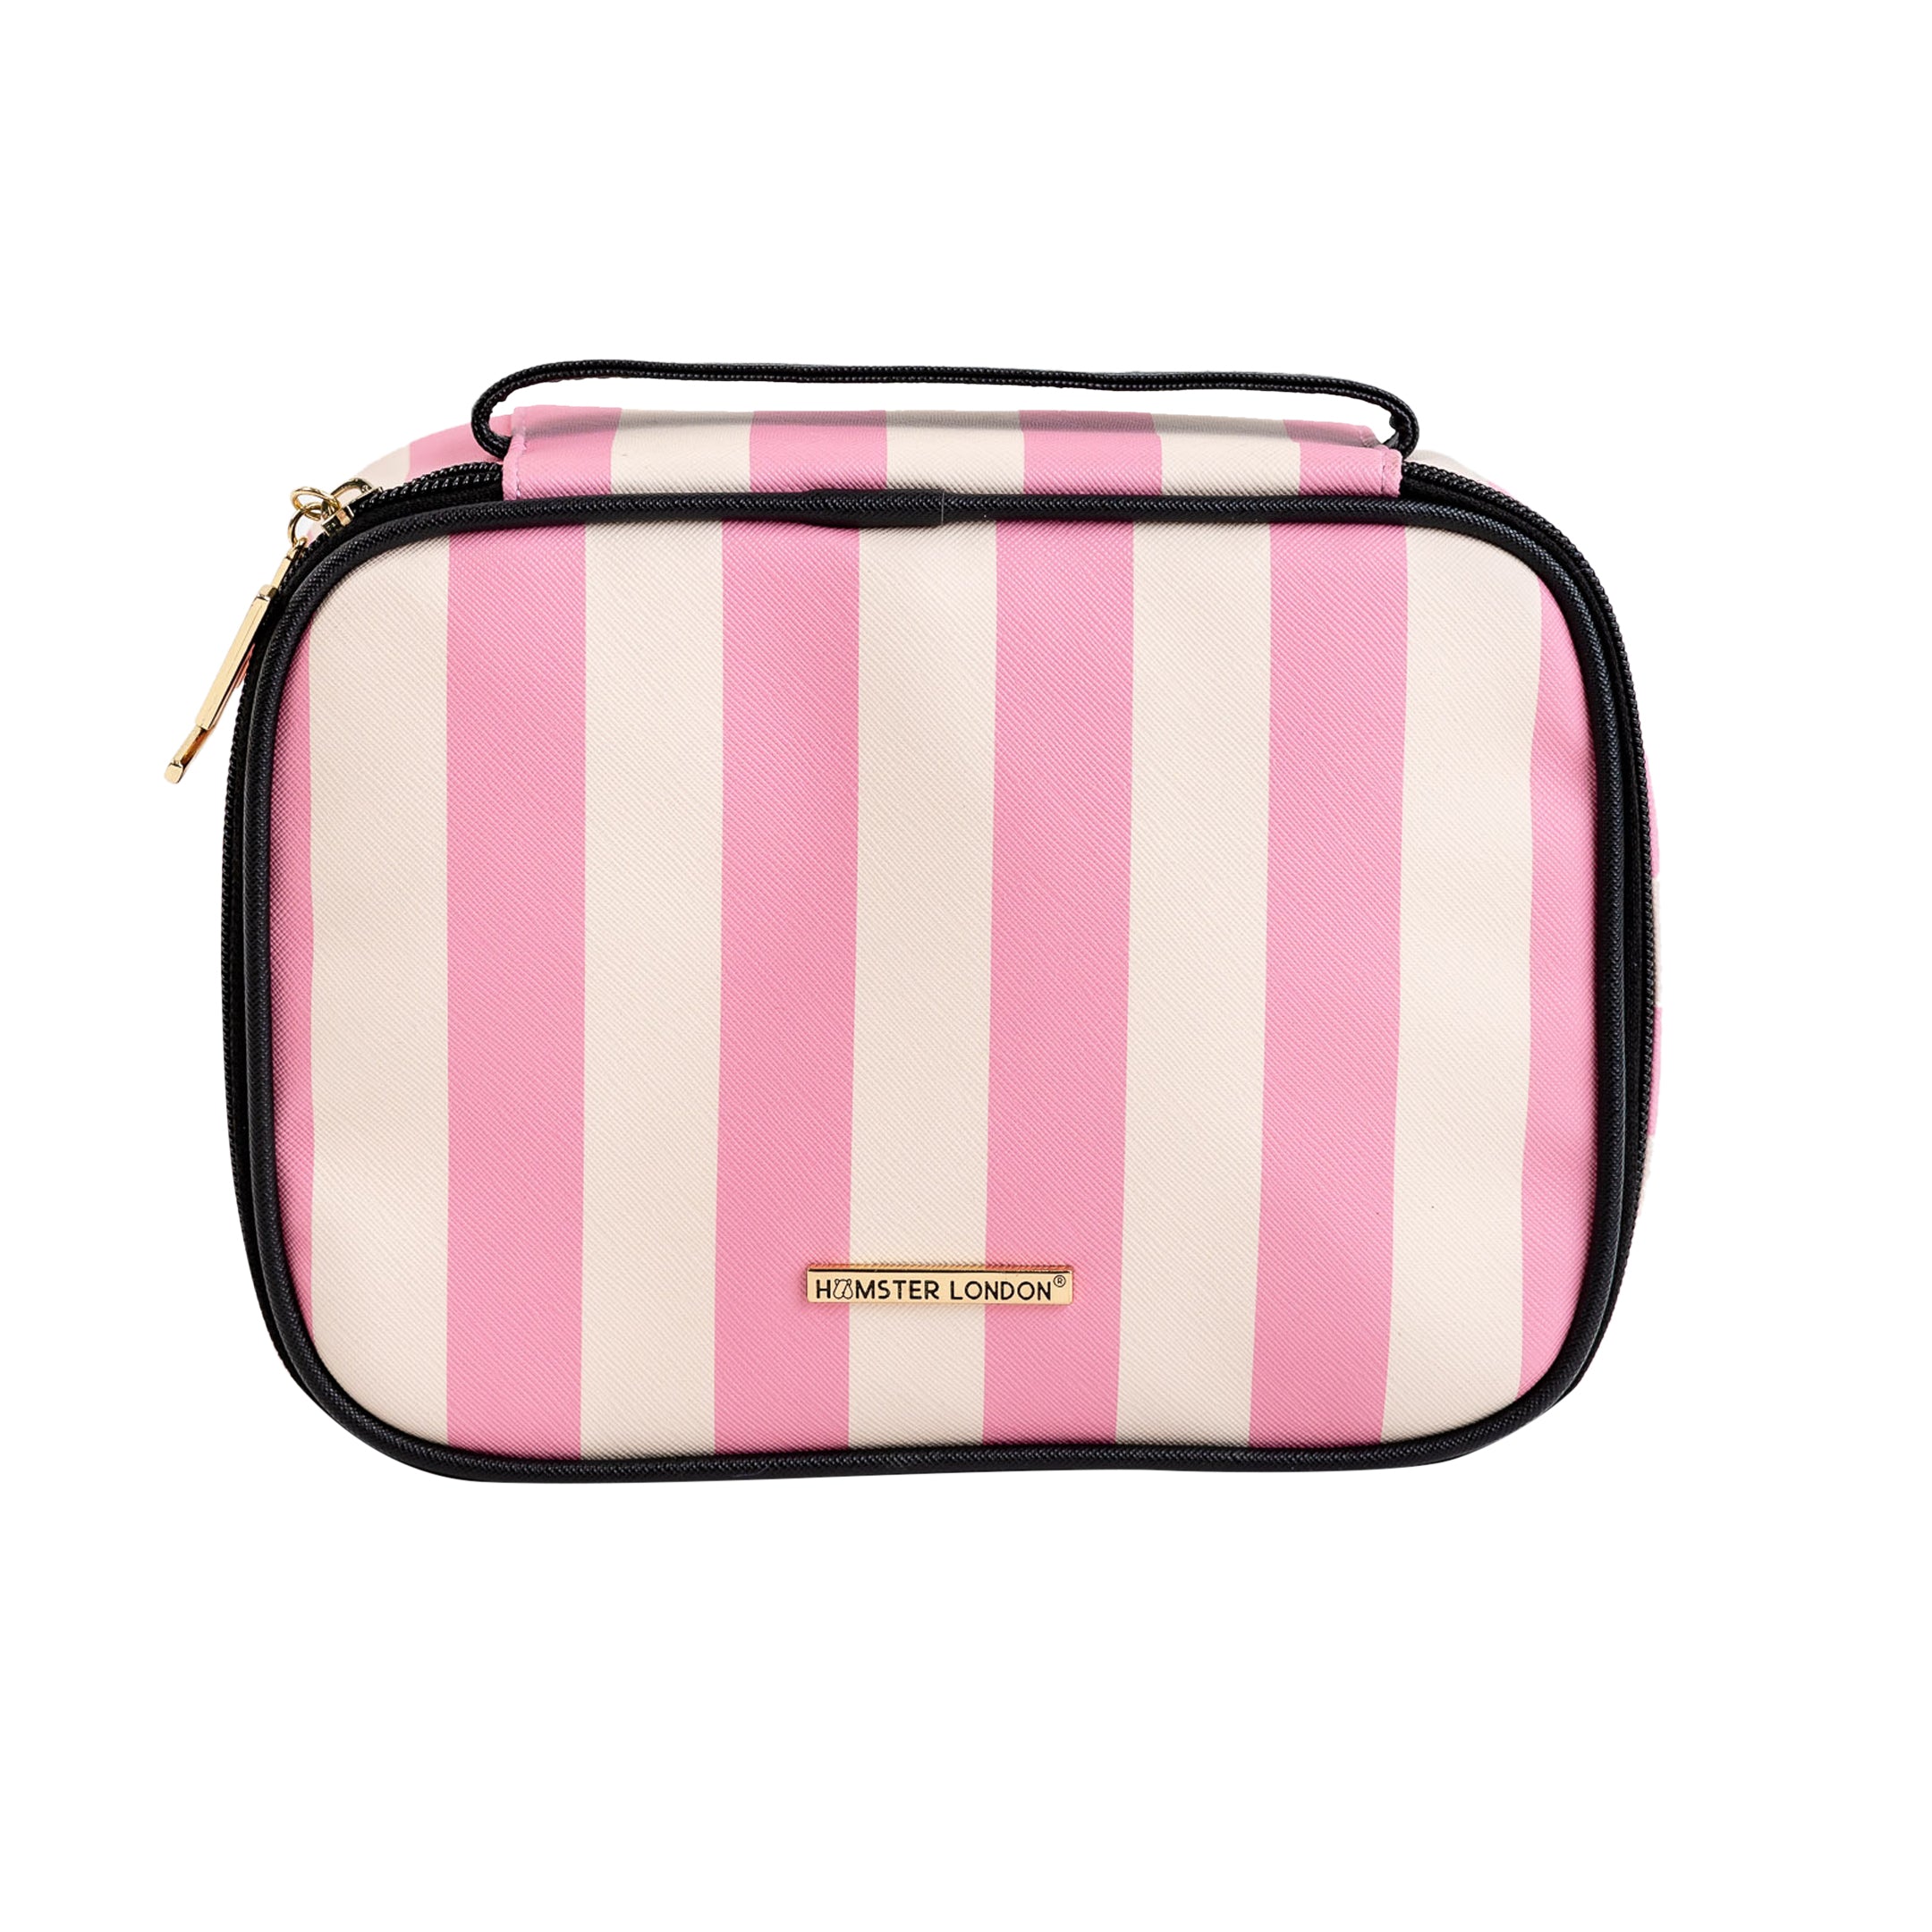 Hamster London Blush Front Open Pouch